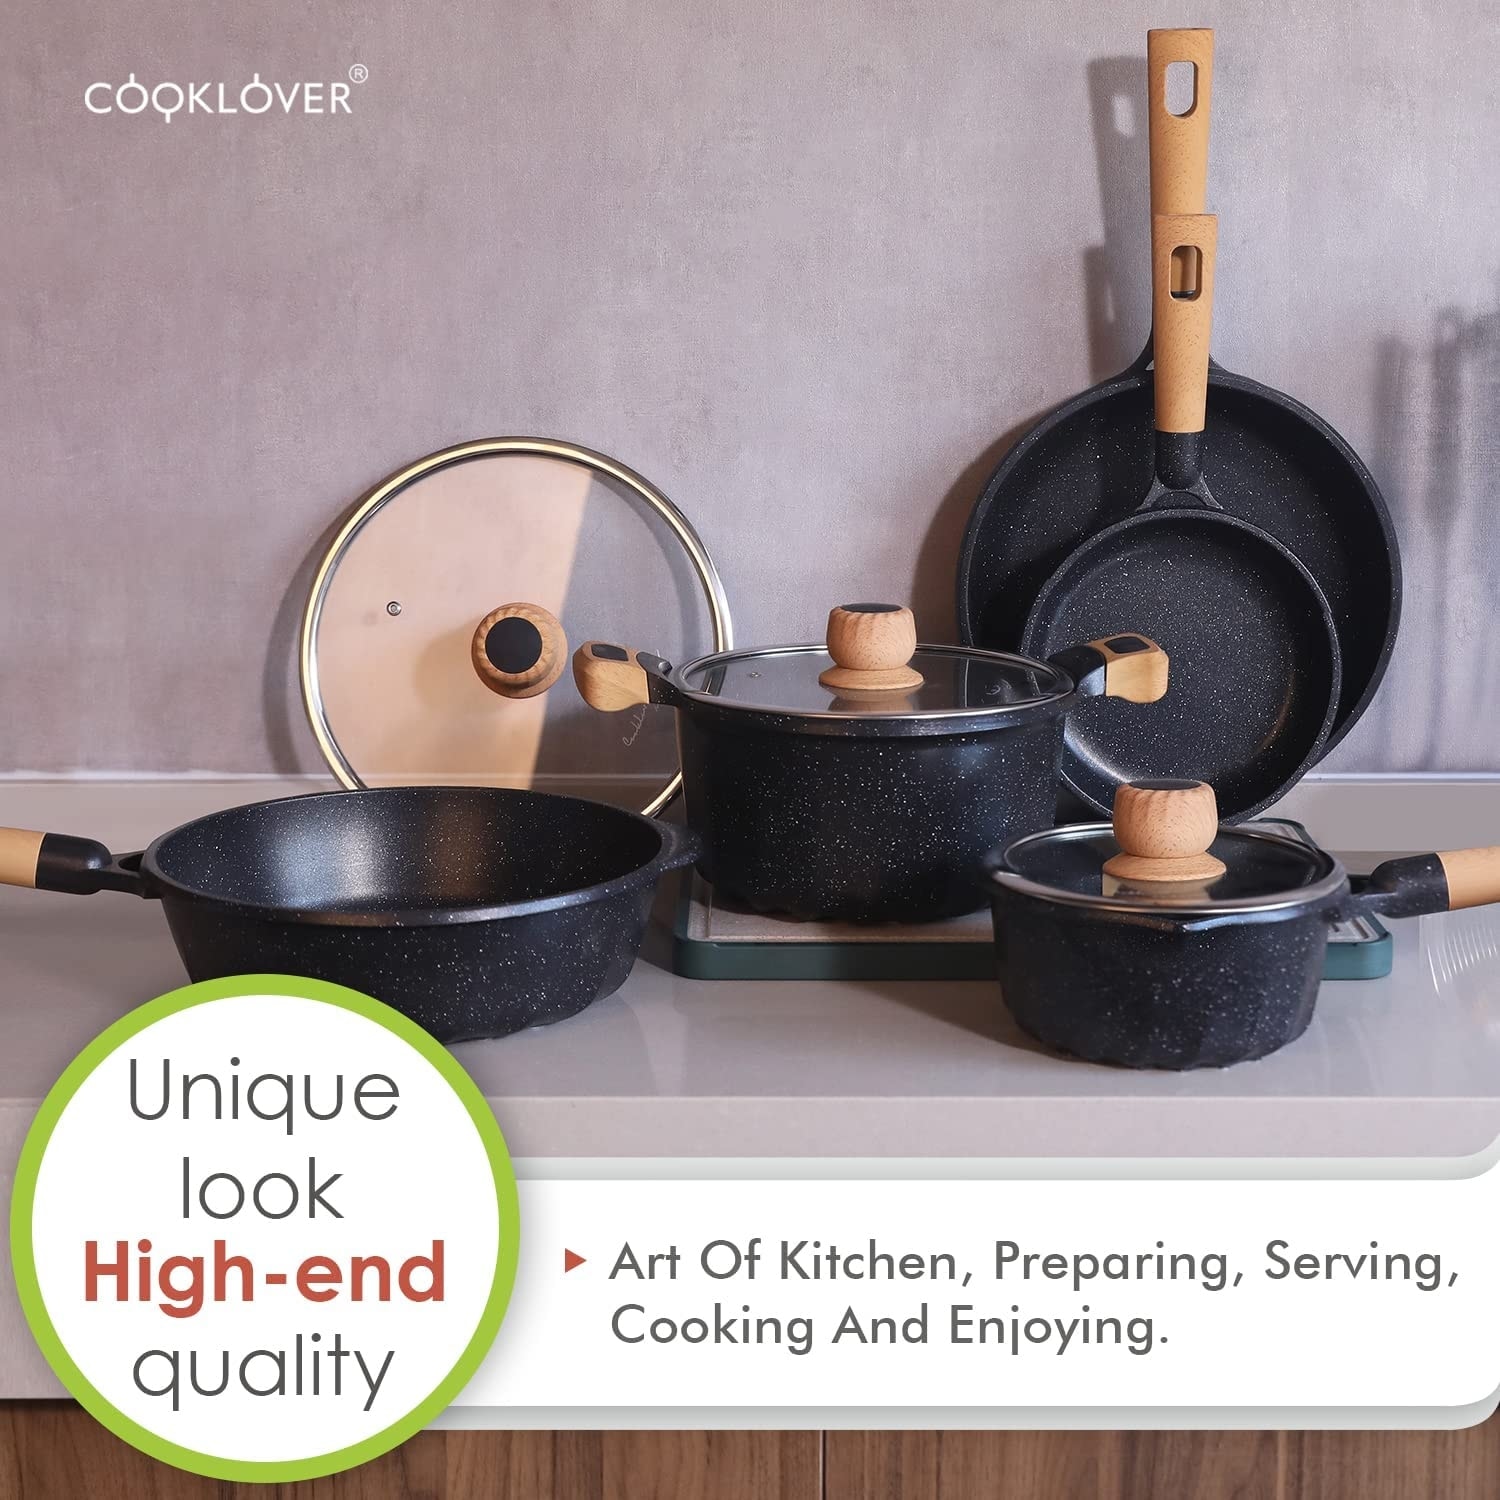 https://ak1.ostkcdn.com/images/products/is/images/direct/bdbd9b493f2bec265423d062f038af5cb46ccc47/Cookware-Set-Nonstick-100%25-PFOA-Free-Induction-Pots-and-Pans-Set-with-Cooking-Utensil-13-Piece-%5Cu2013-White.jpg